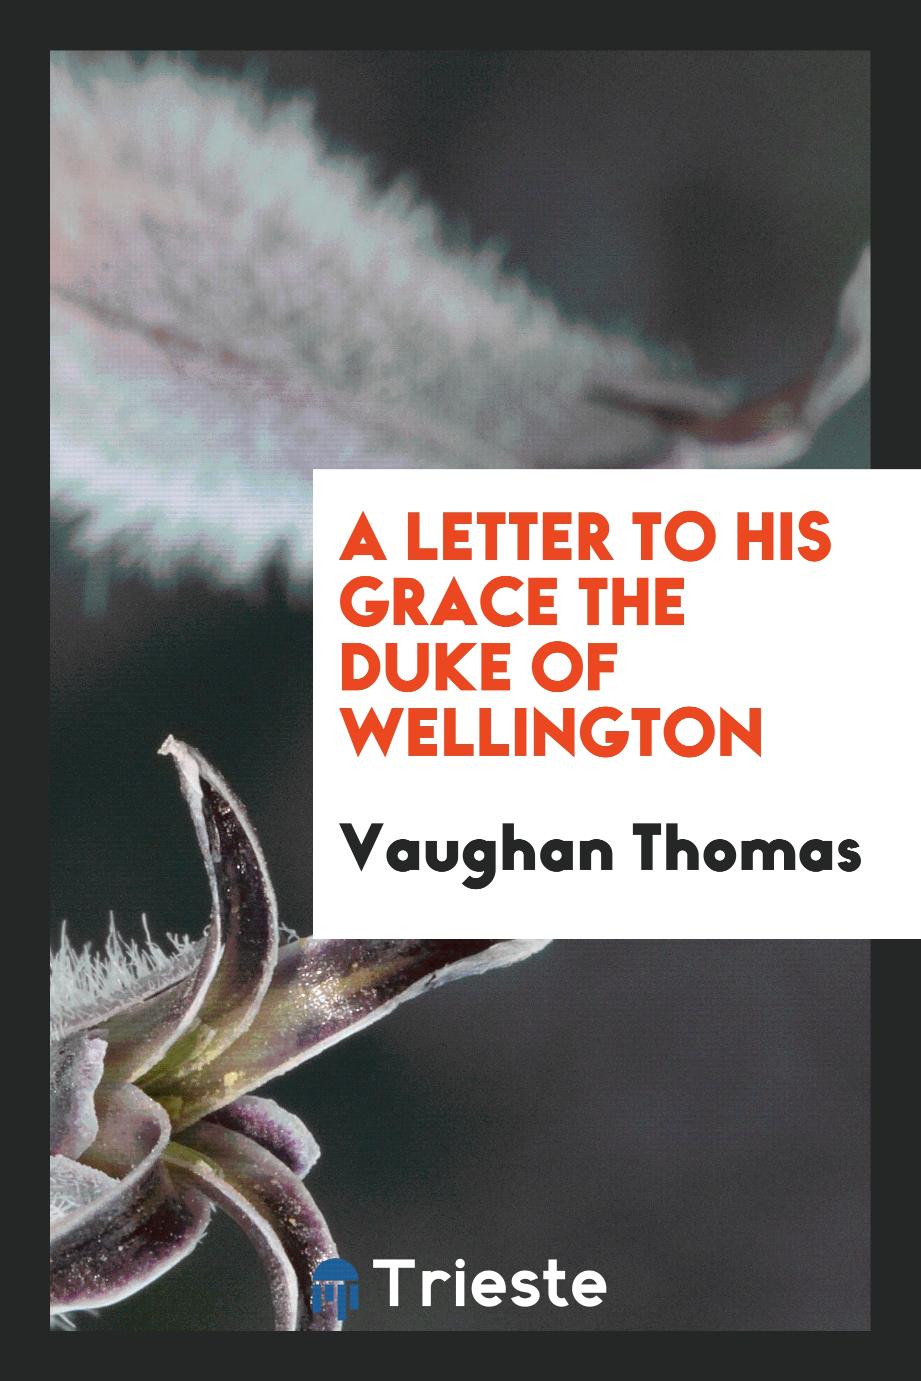 A letter to his grace the Duke of Wellington